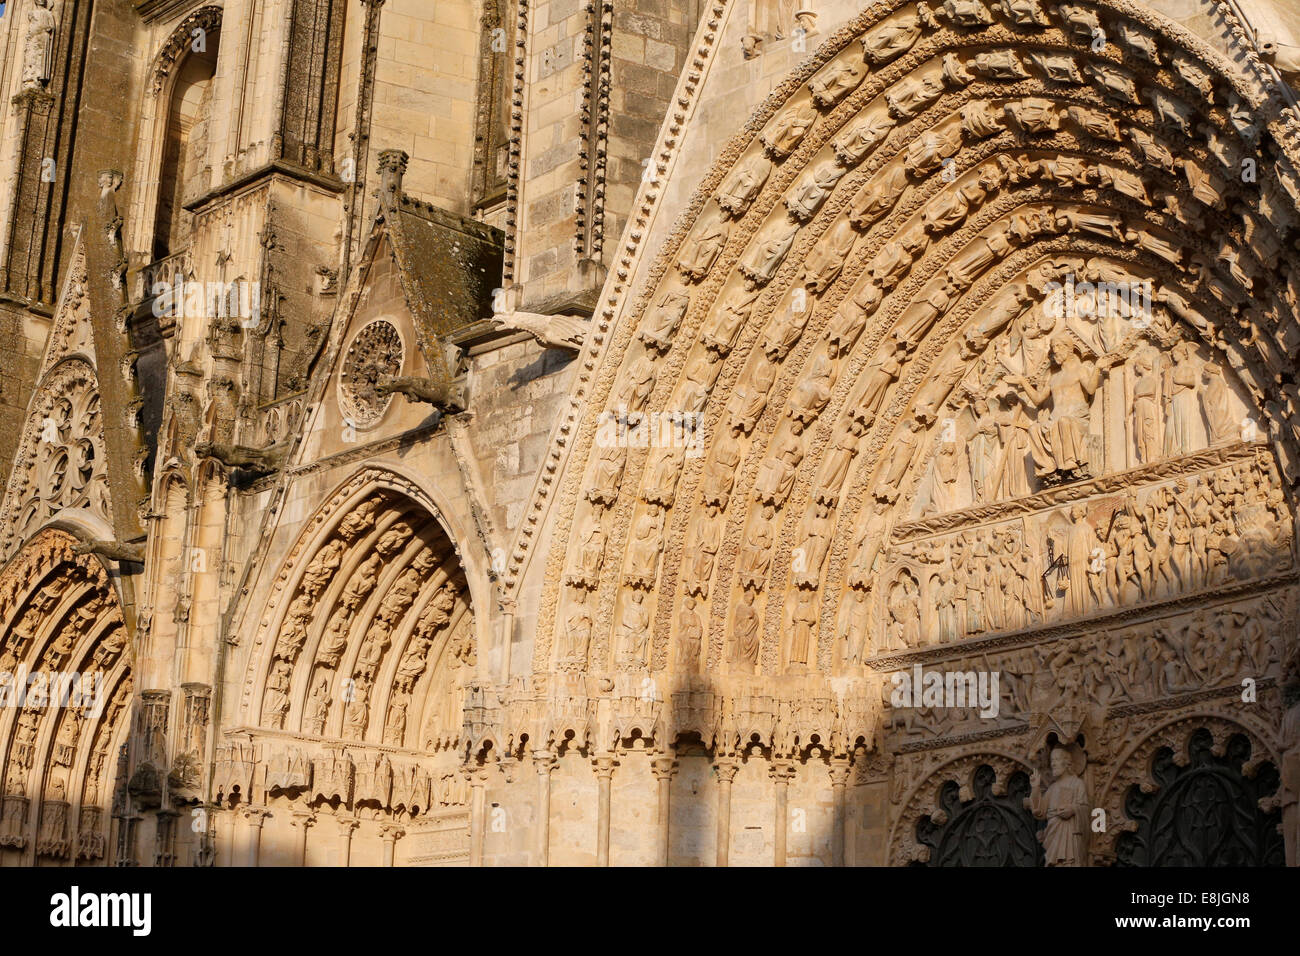 Portals of Bourges Cathedral. Stock Photo